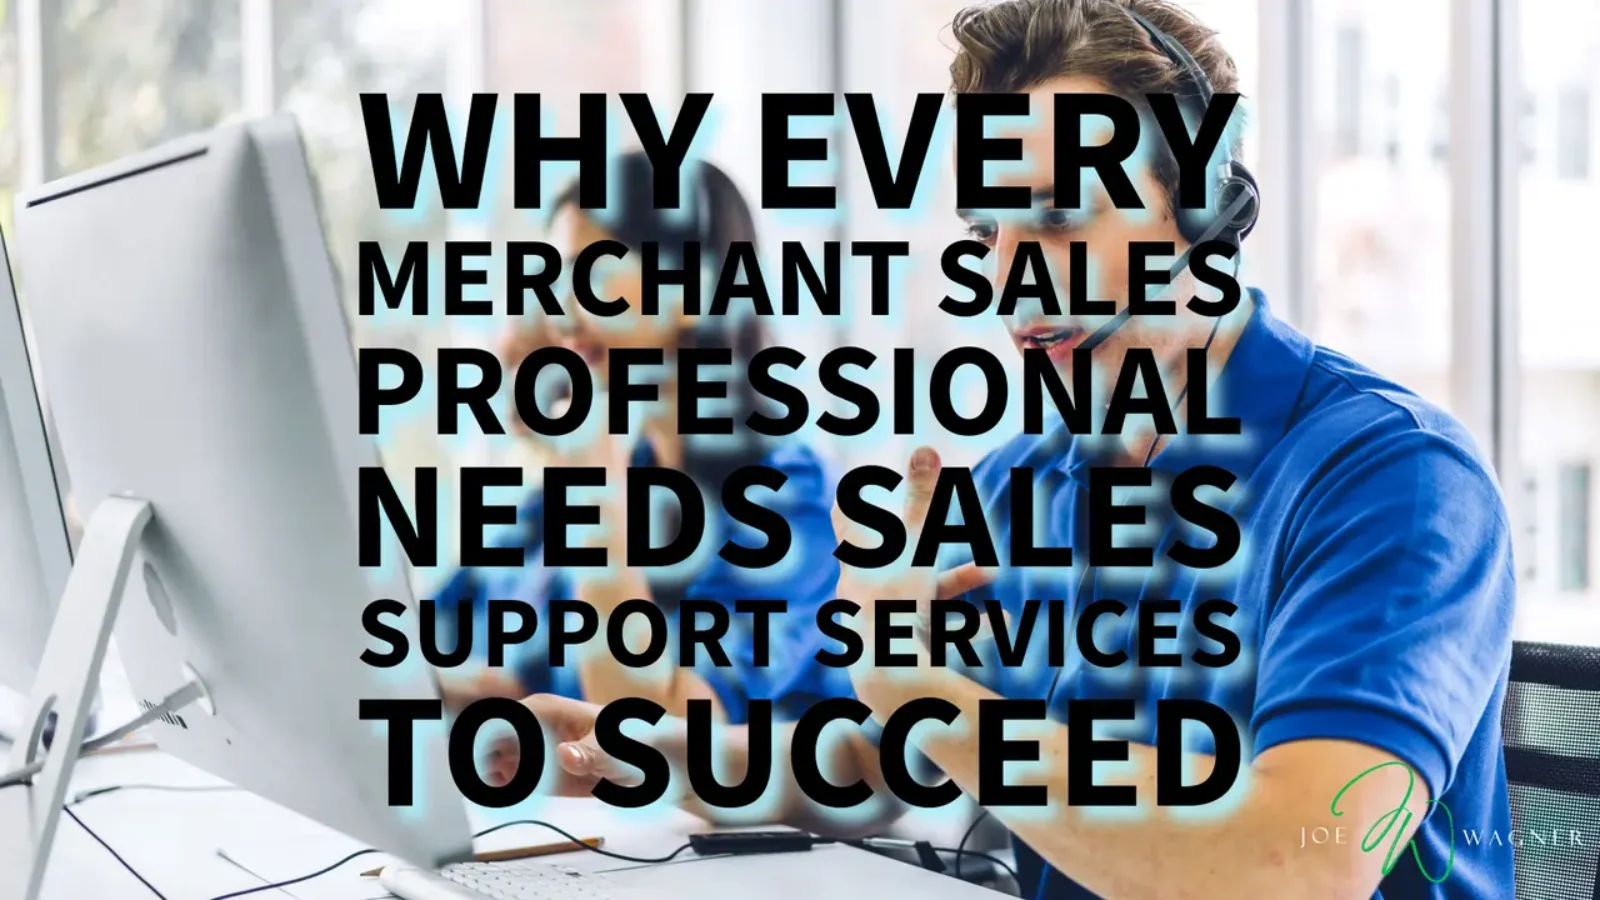 7 Fundamental Tips Why Every Merchant Sales Professionals Needs Sales Support to Succeed